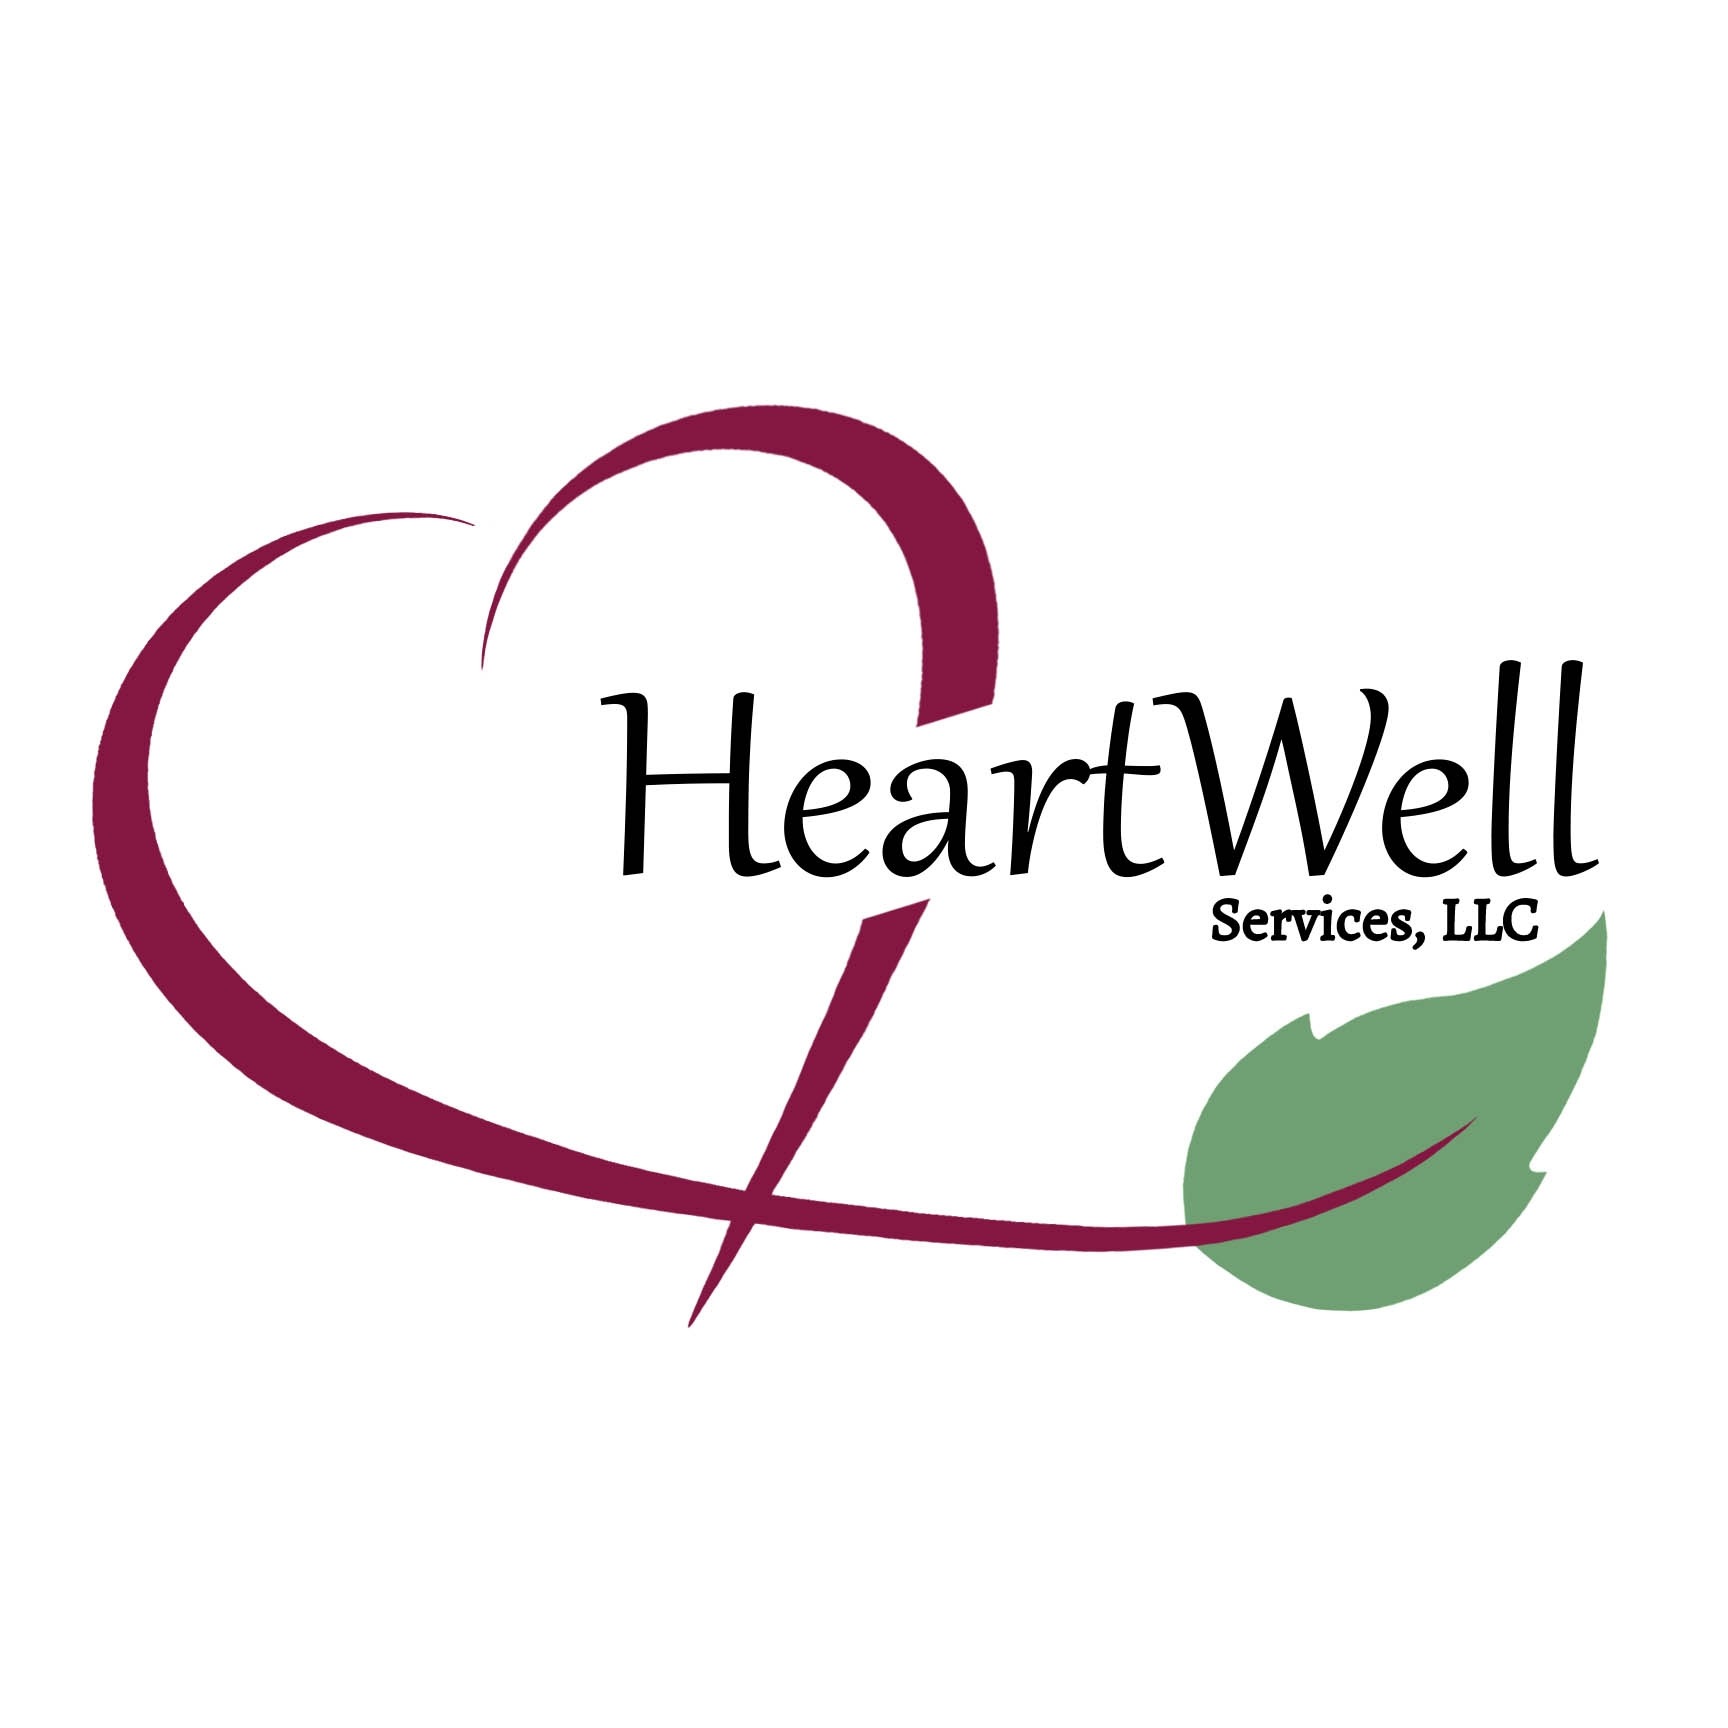 Heartwell Services, LLC